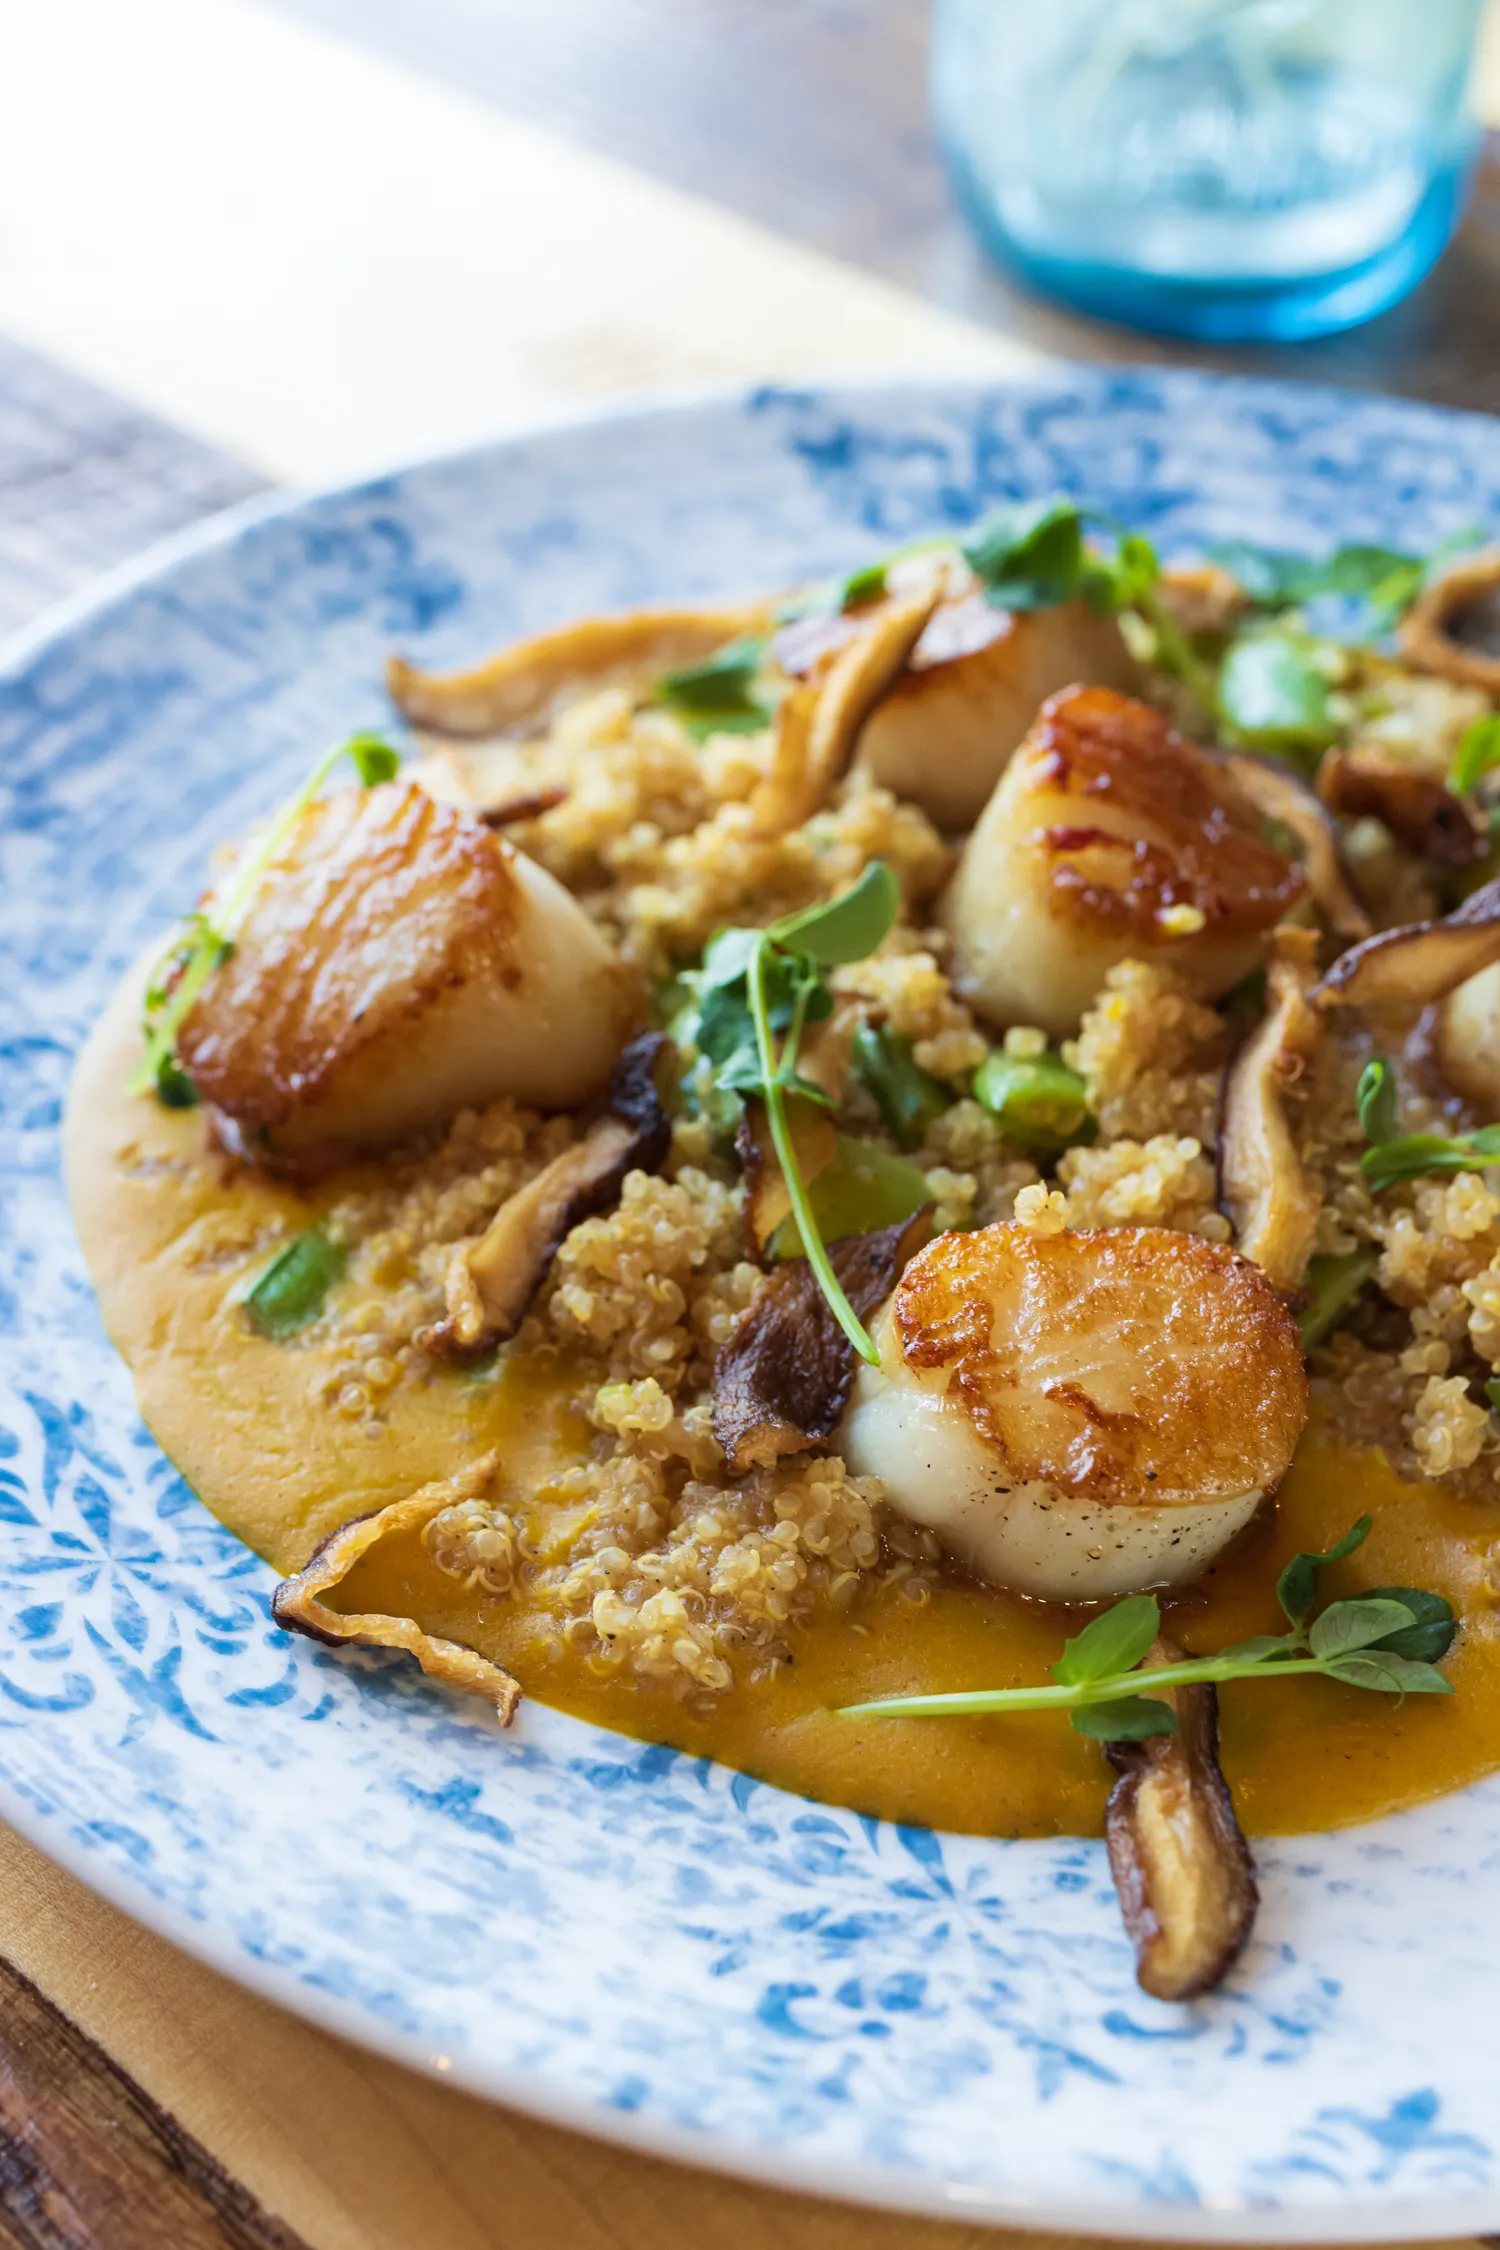 Pan-seared scallops over quinoa at Earl's New American plated in a wide bowl on a farm table.